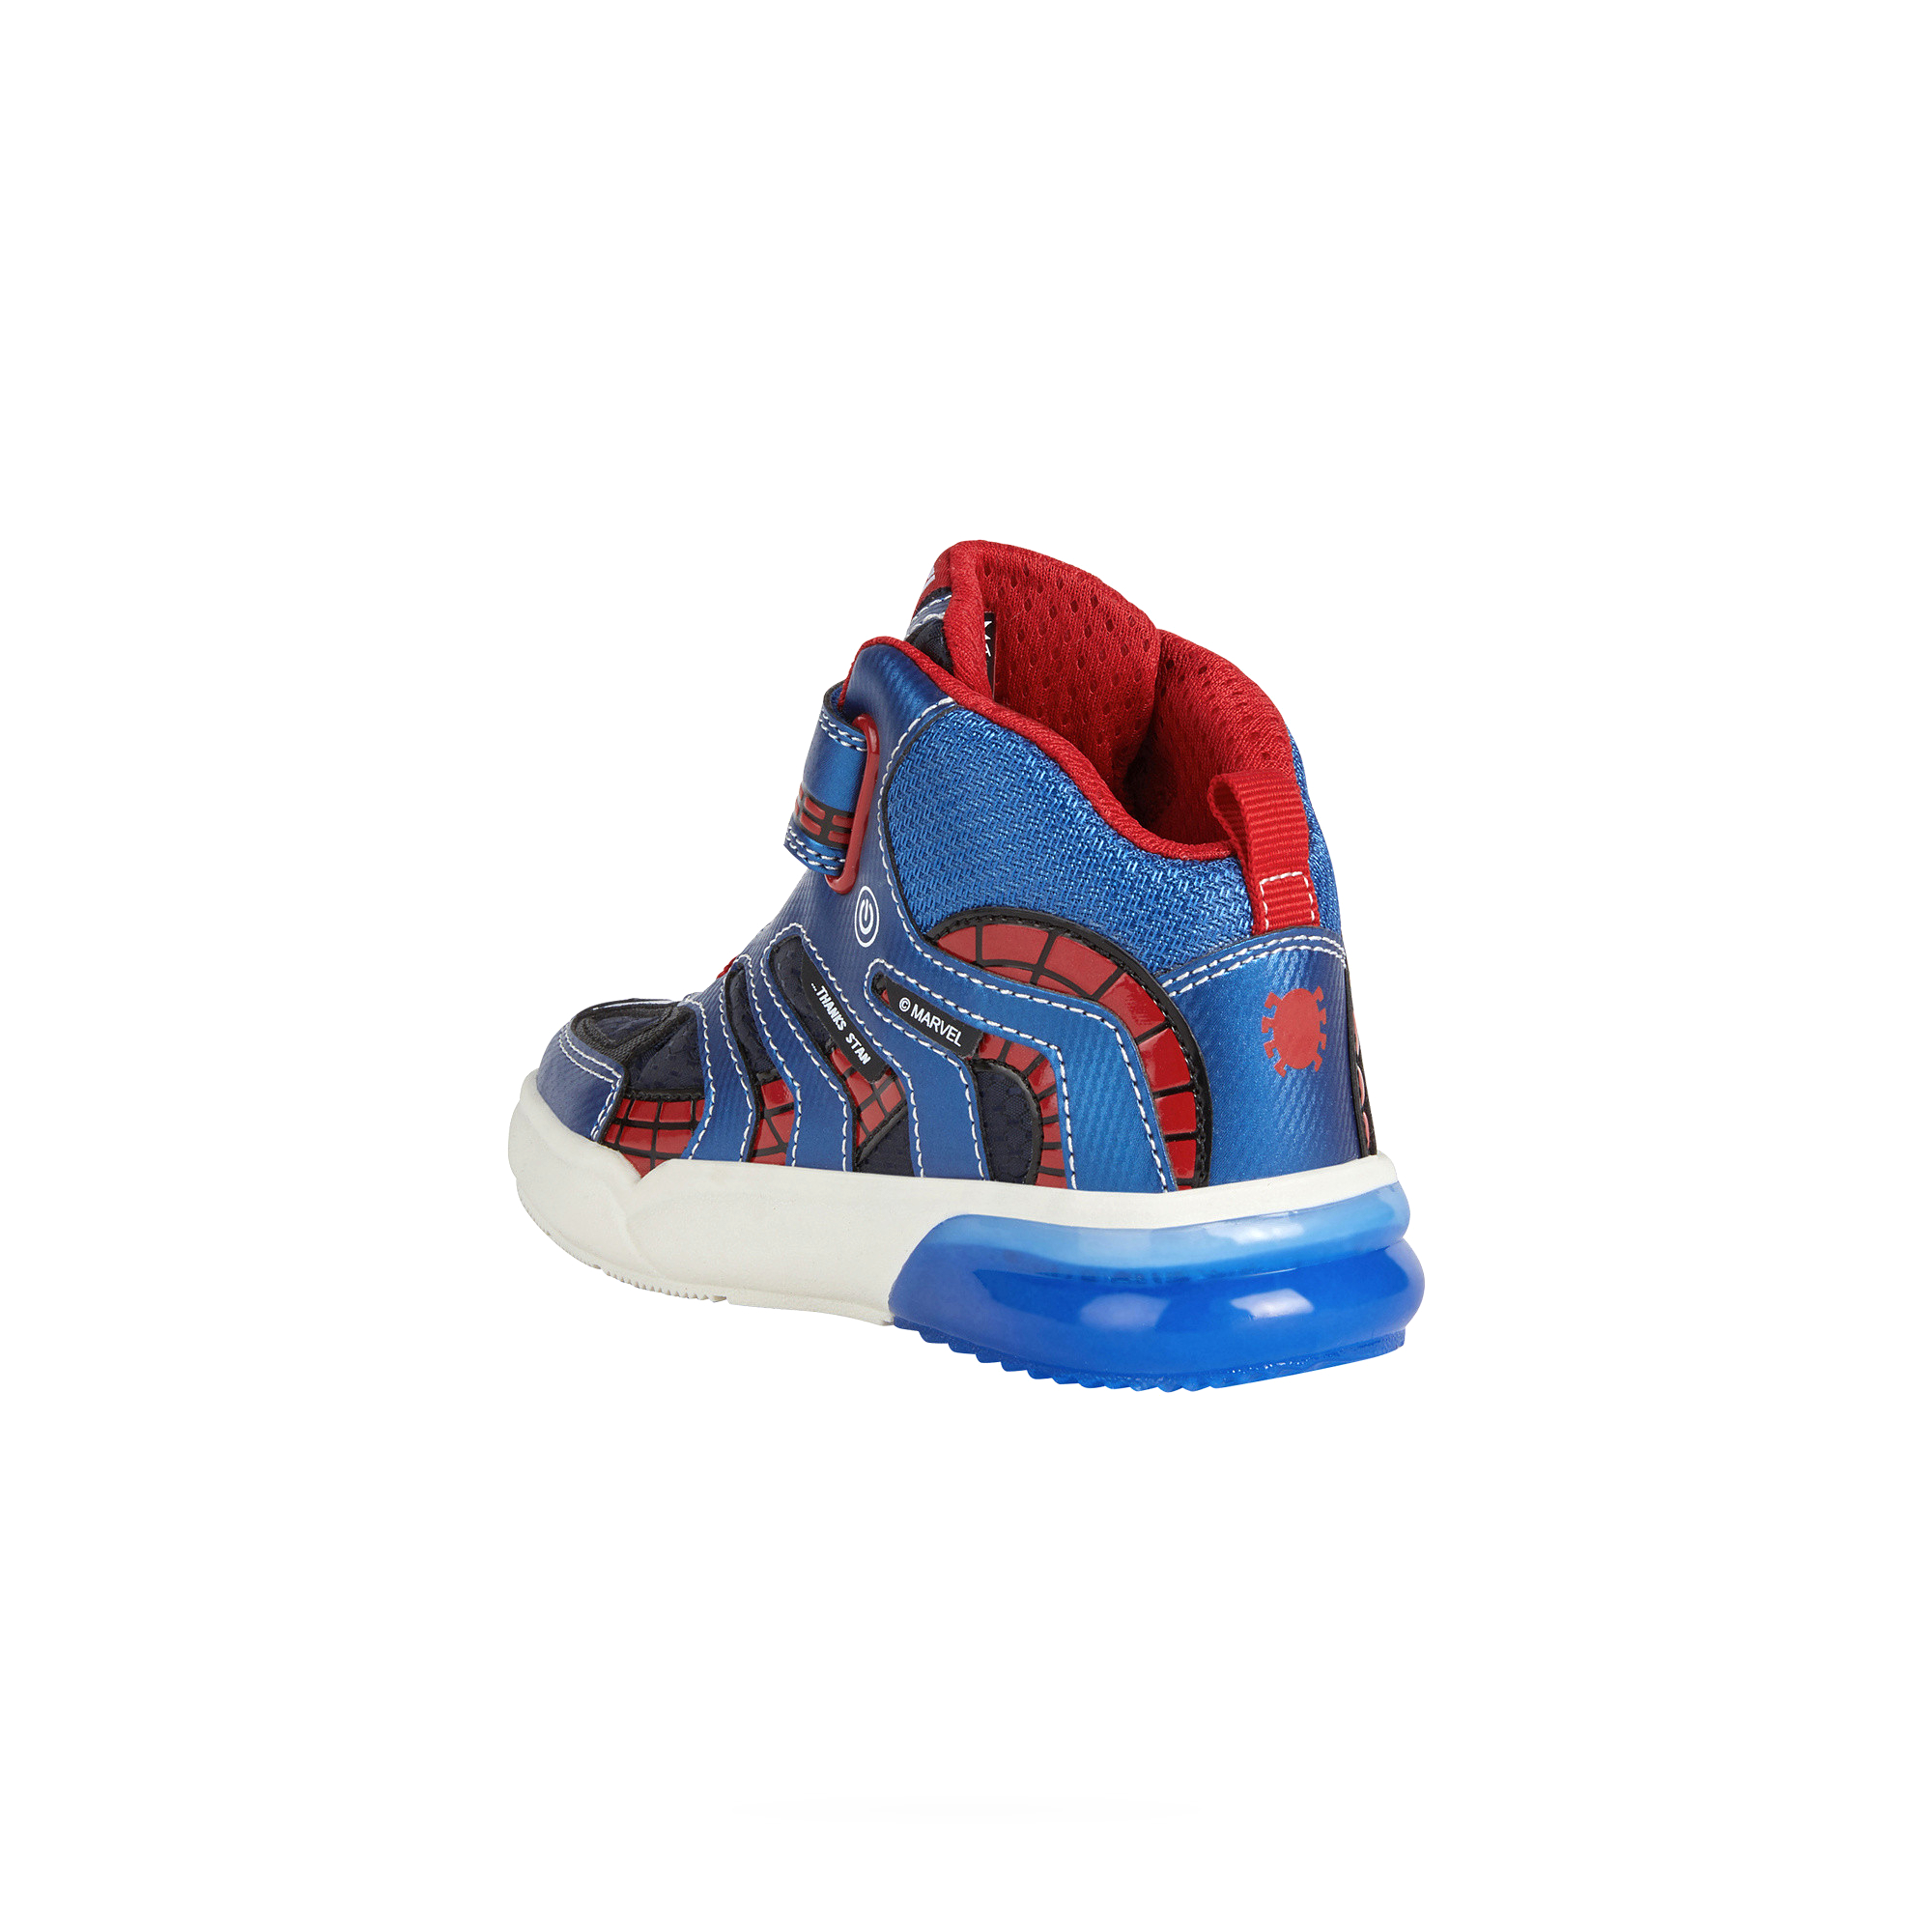 Marvel Spider-Man | From Child Geox Shoes High LED Sneakers Spider eBay Lights With Man